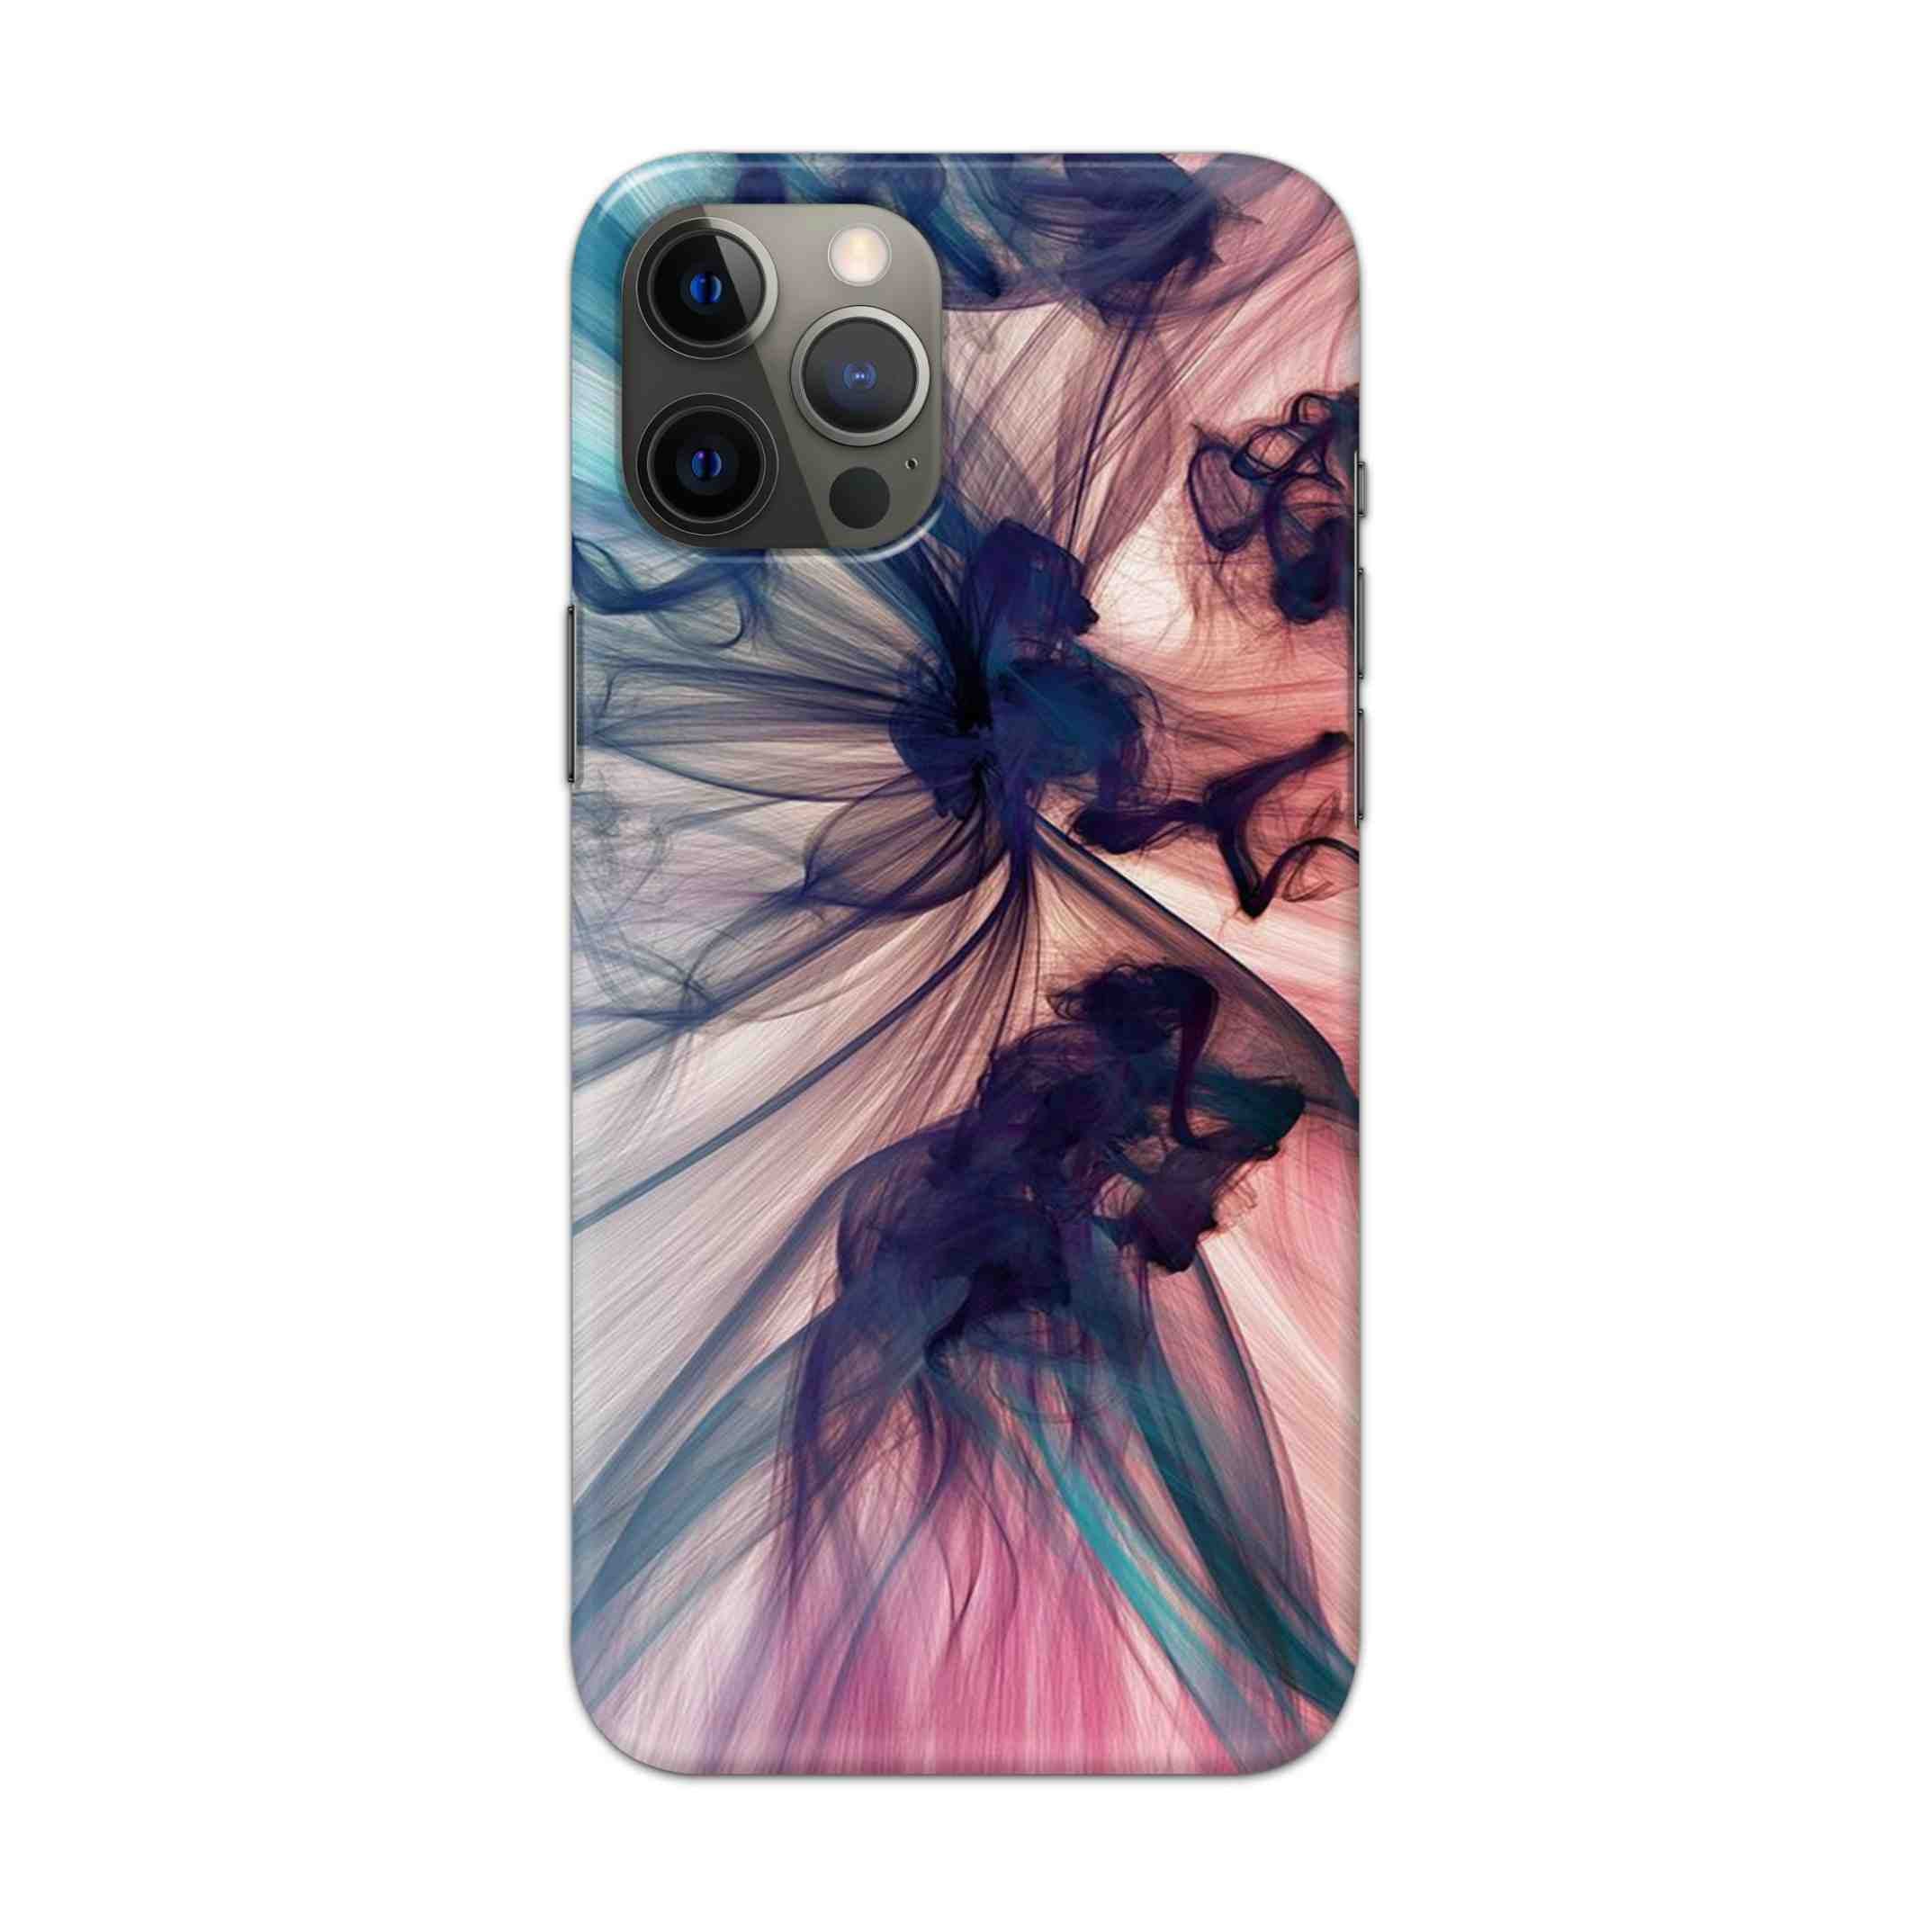 Buy Colourful Texture Hard Back Mobile Phone Case Cover For Apple iPhone 13 Pro Online